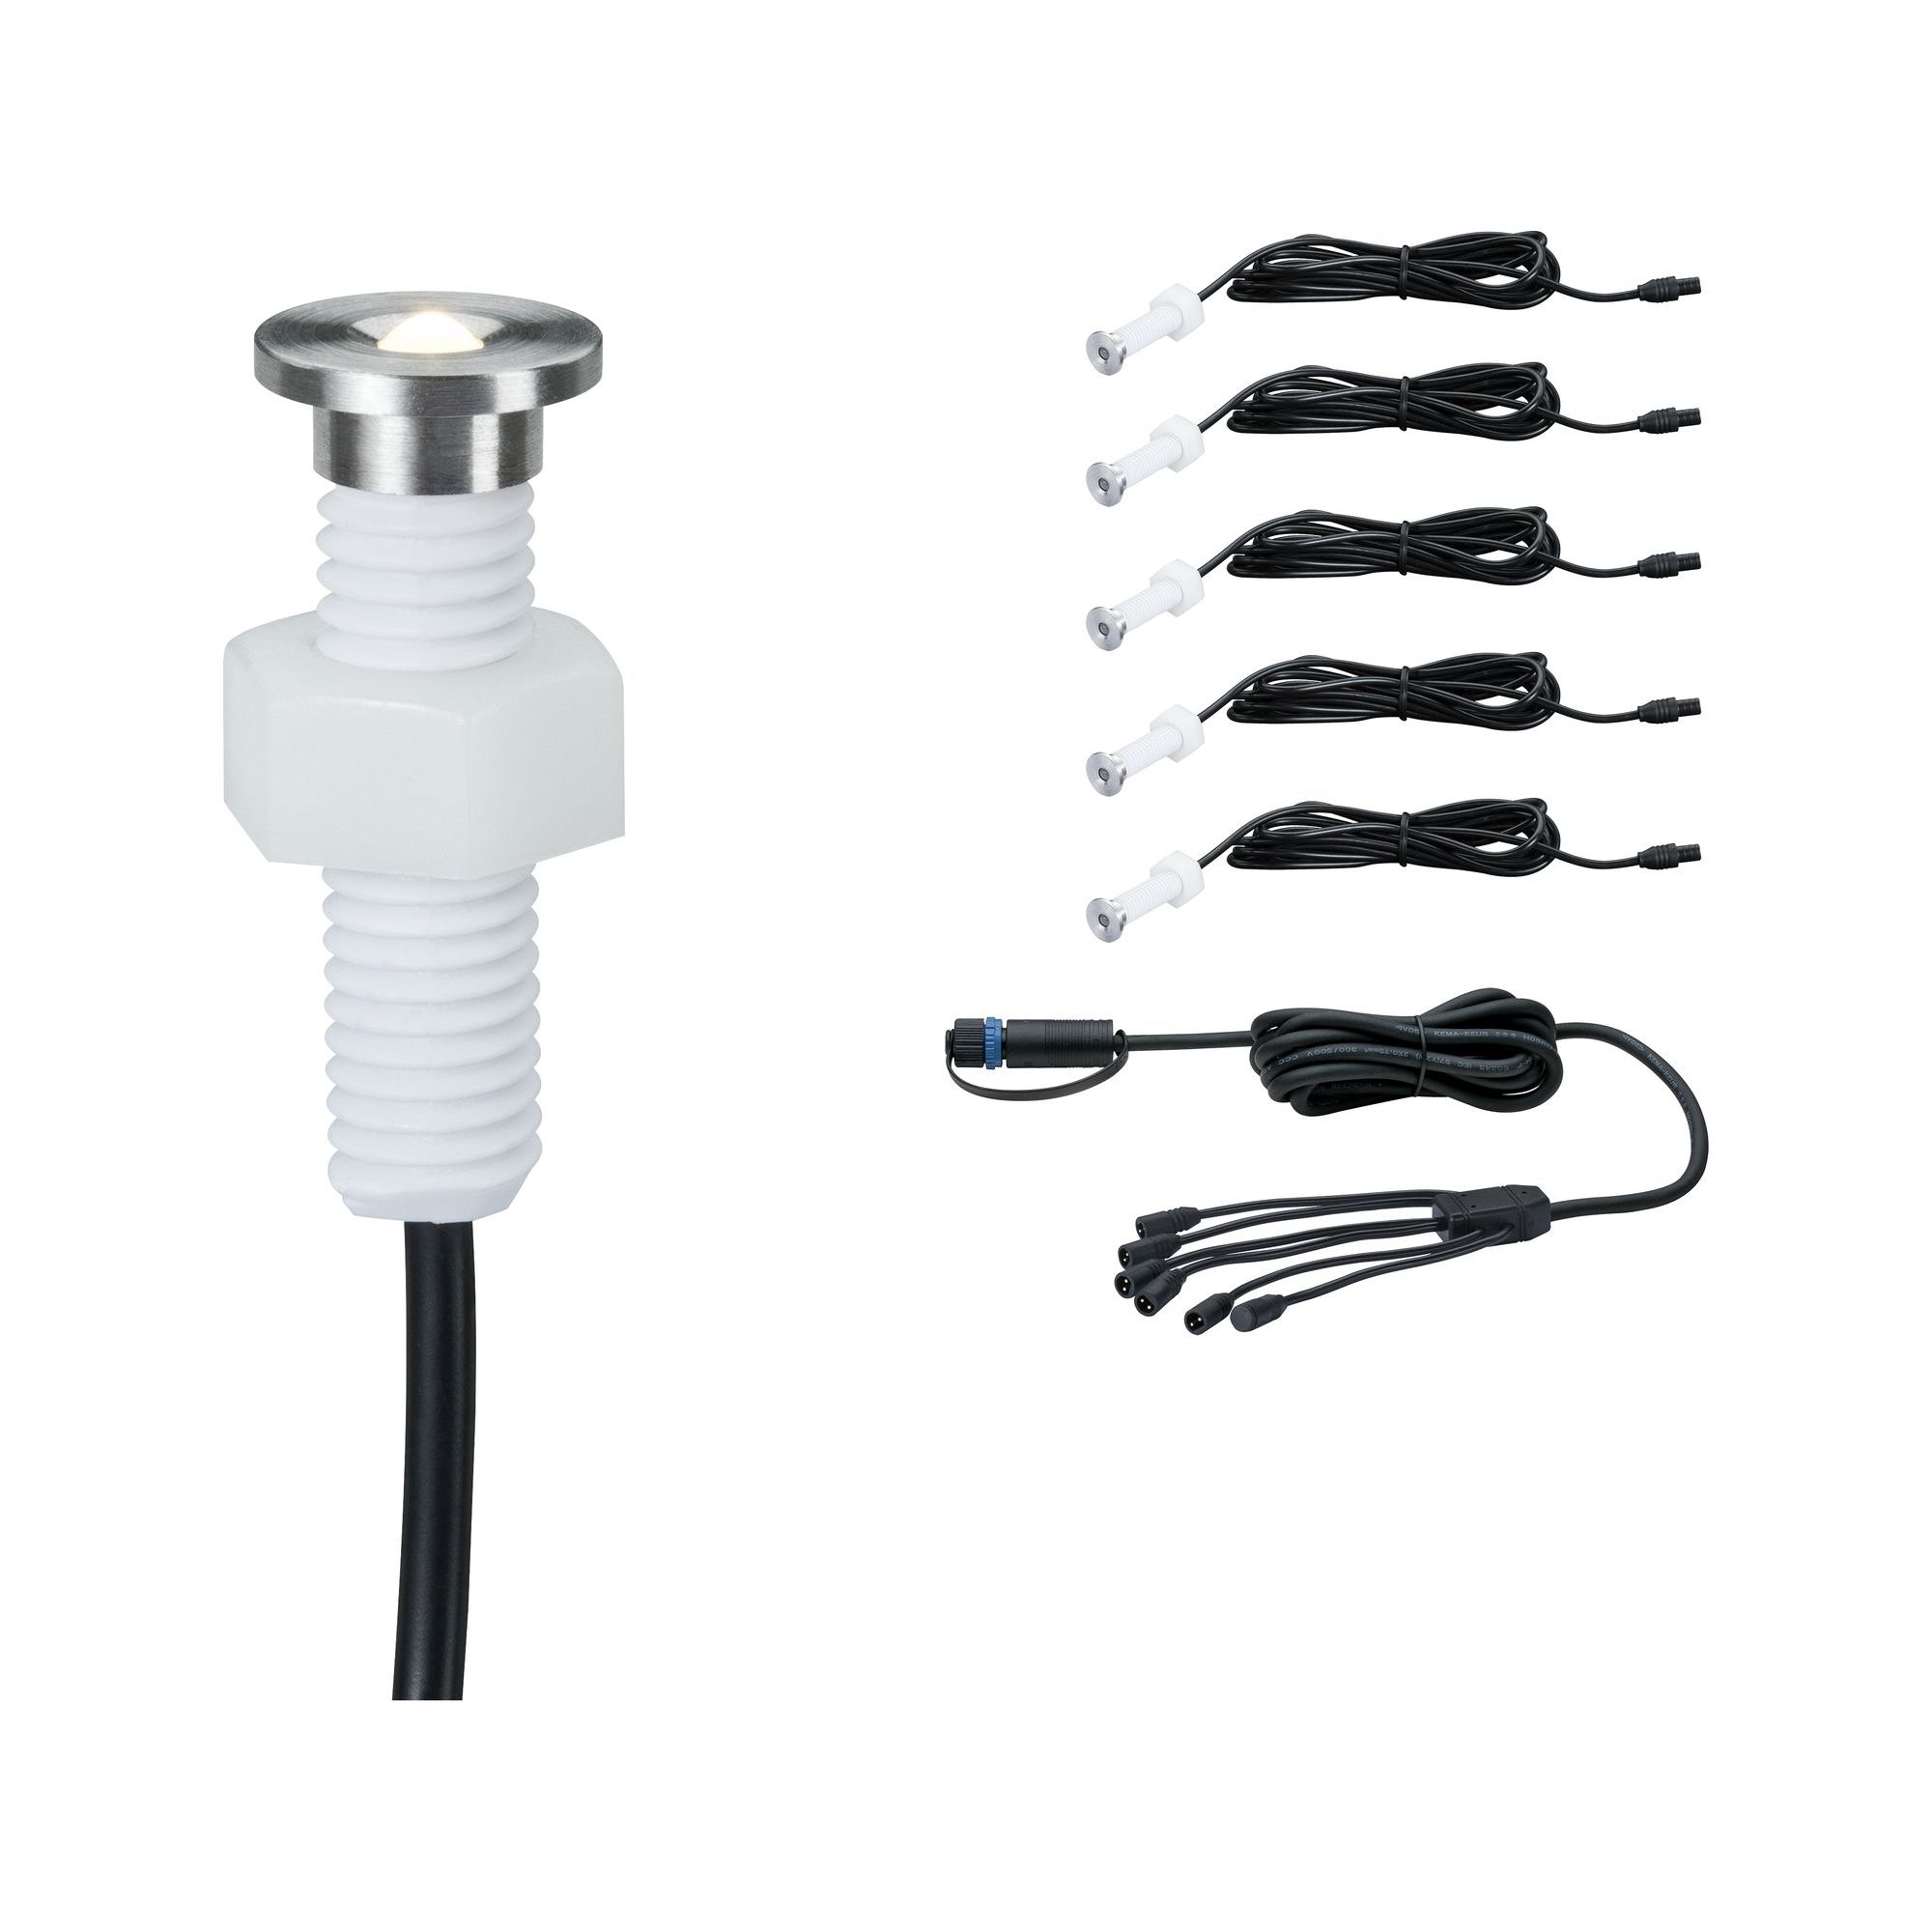 LED-Beleuchtung 'Plug & Shine MicroPen II'-Set silbern + product picture